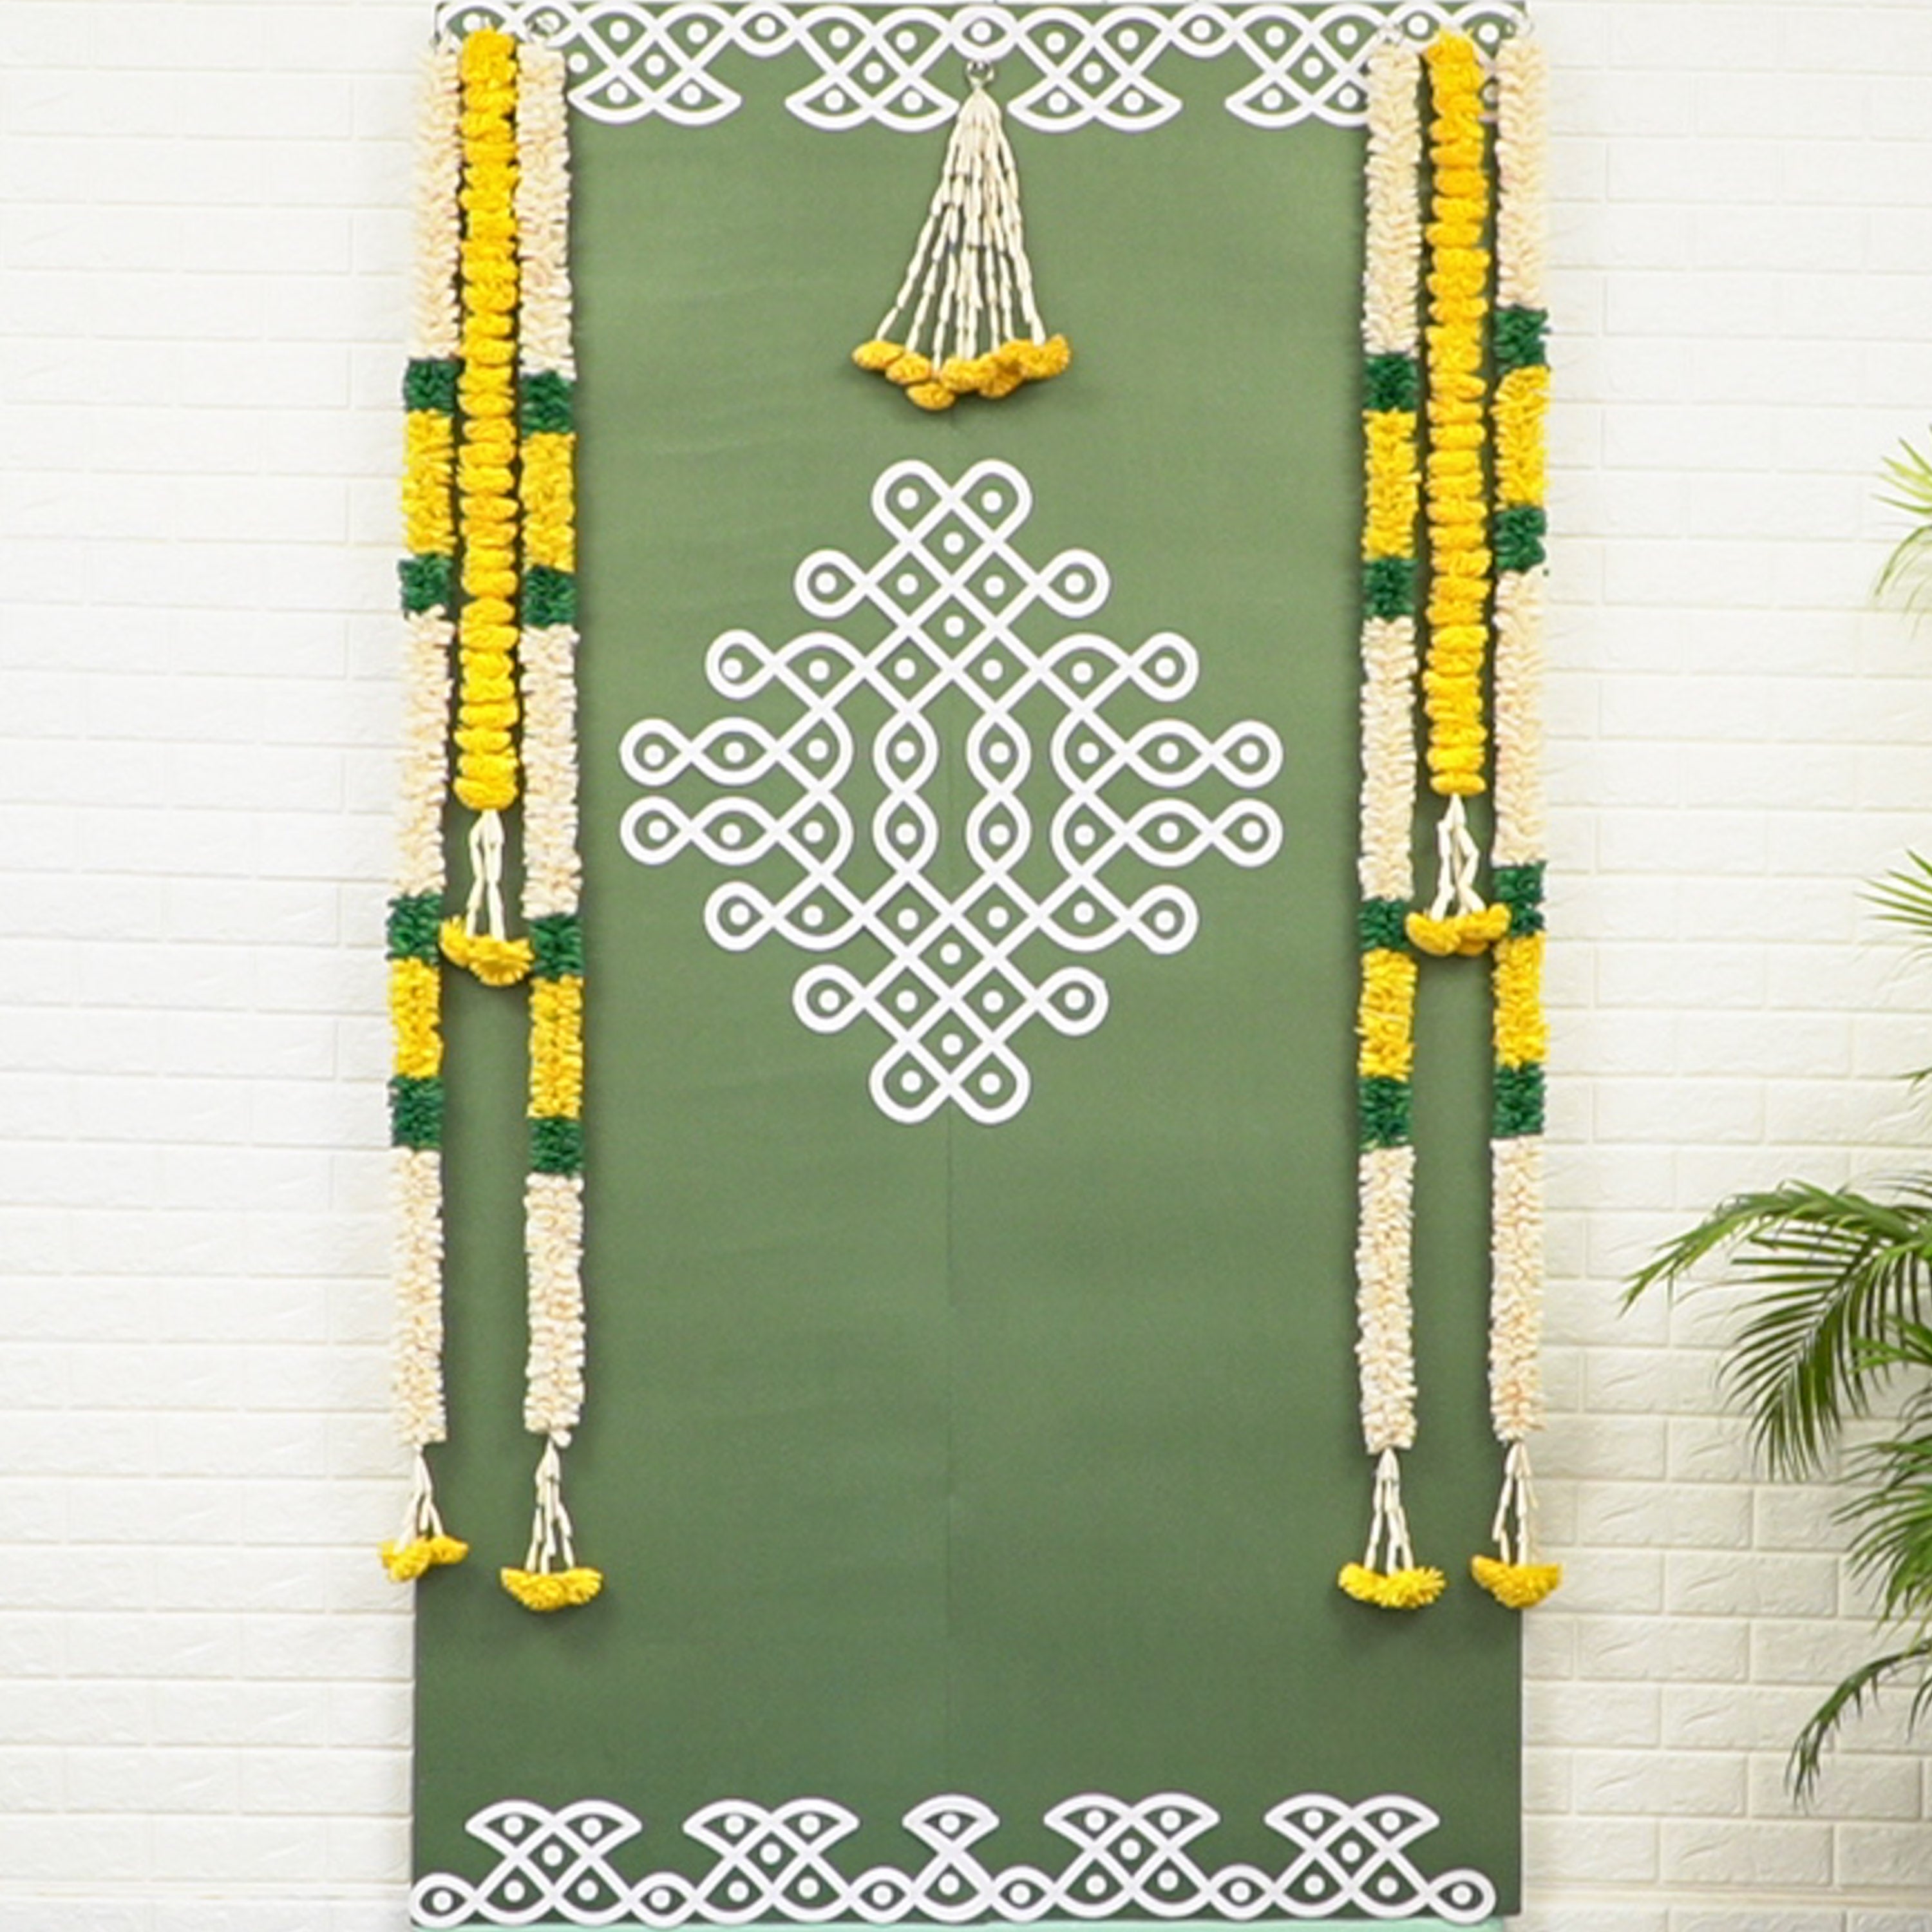 Muggu Design Backdrop Kit for Indian Pooja Rituals online in the USA